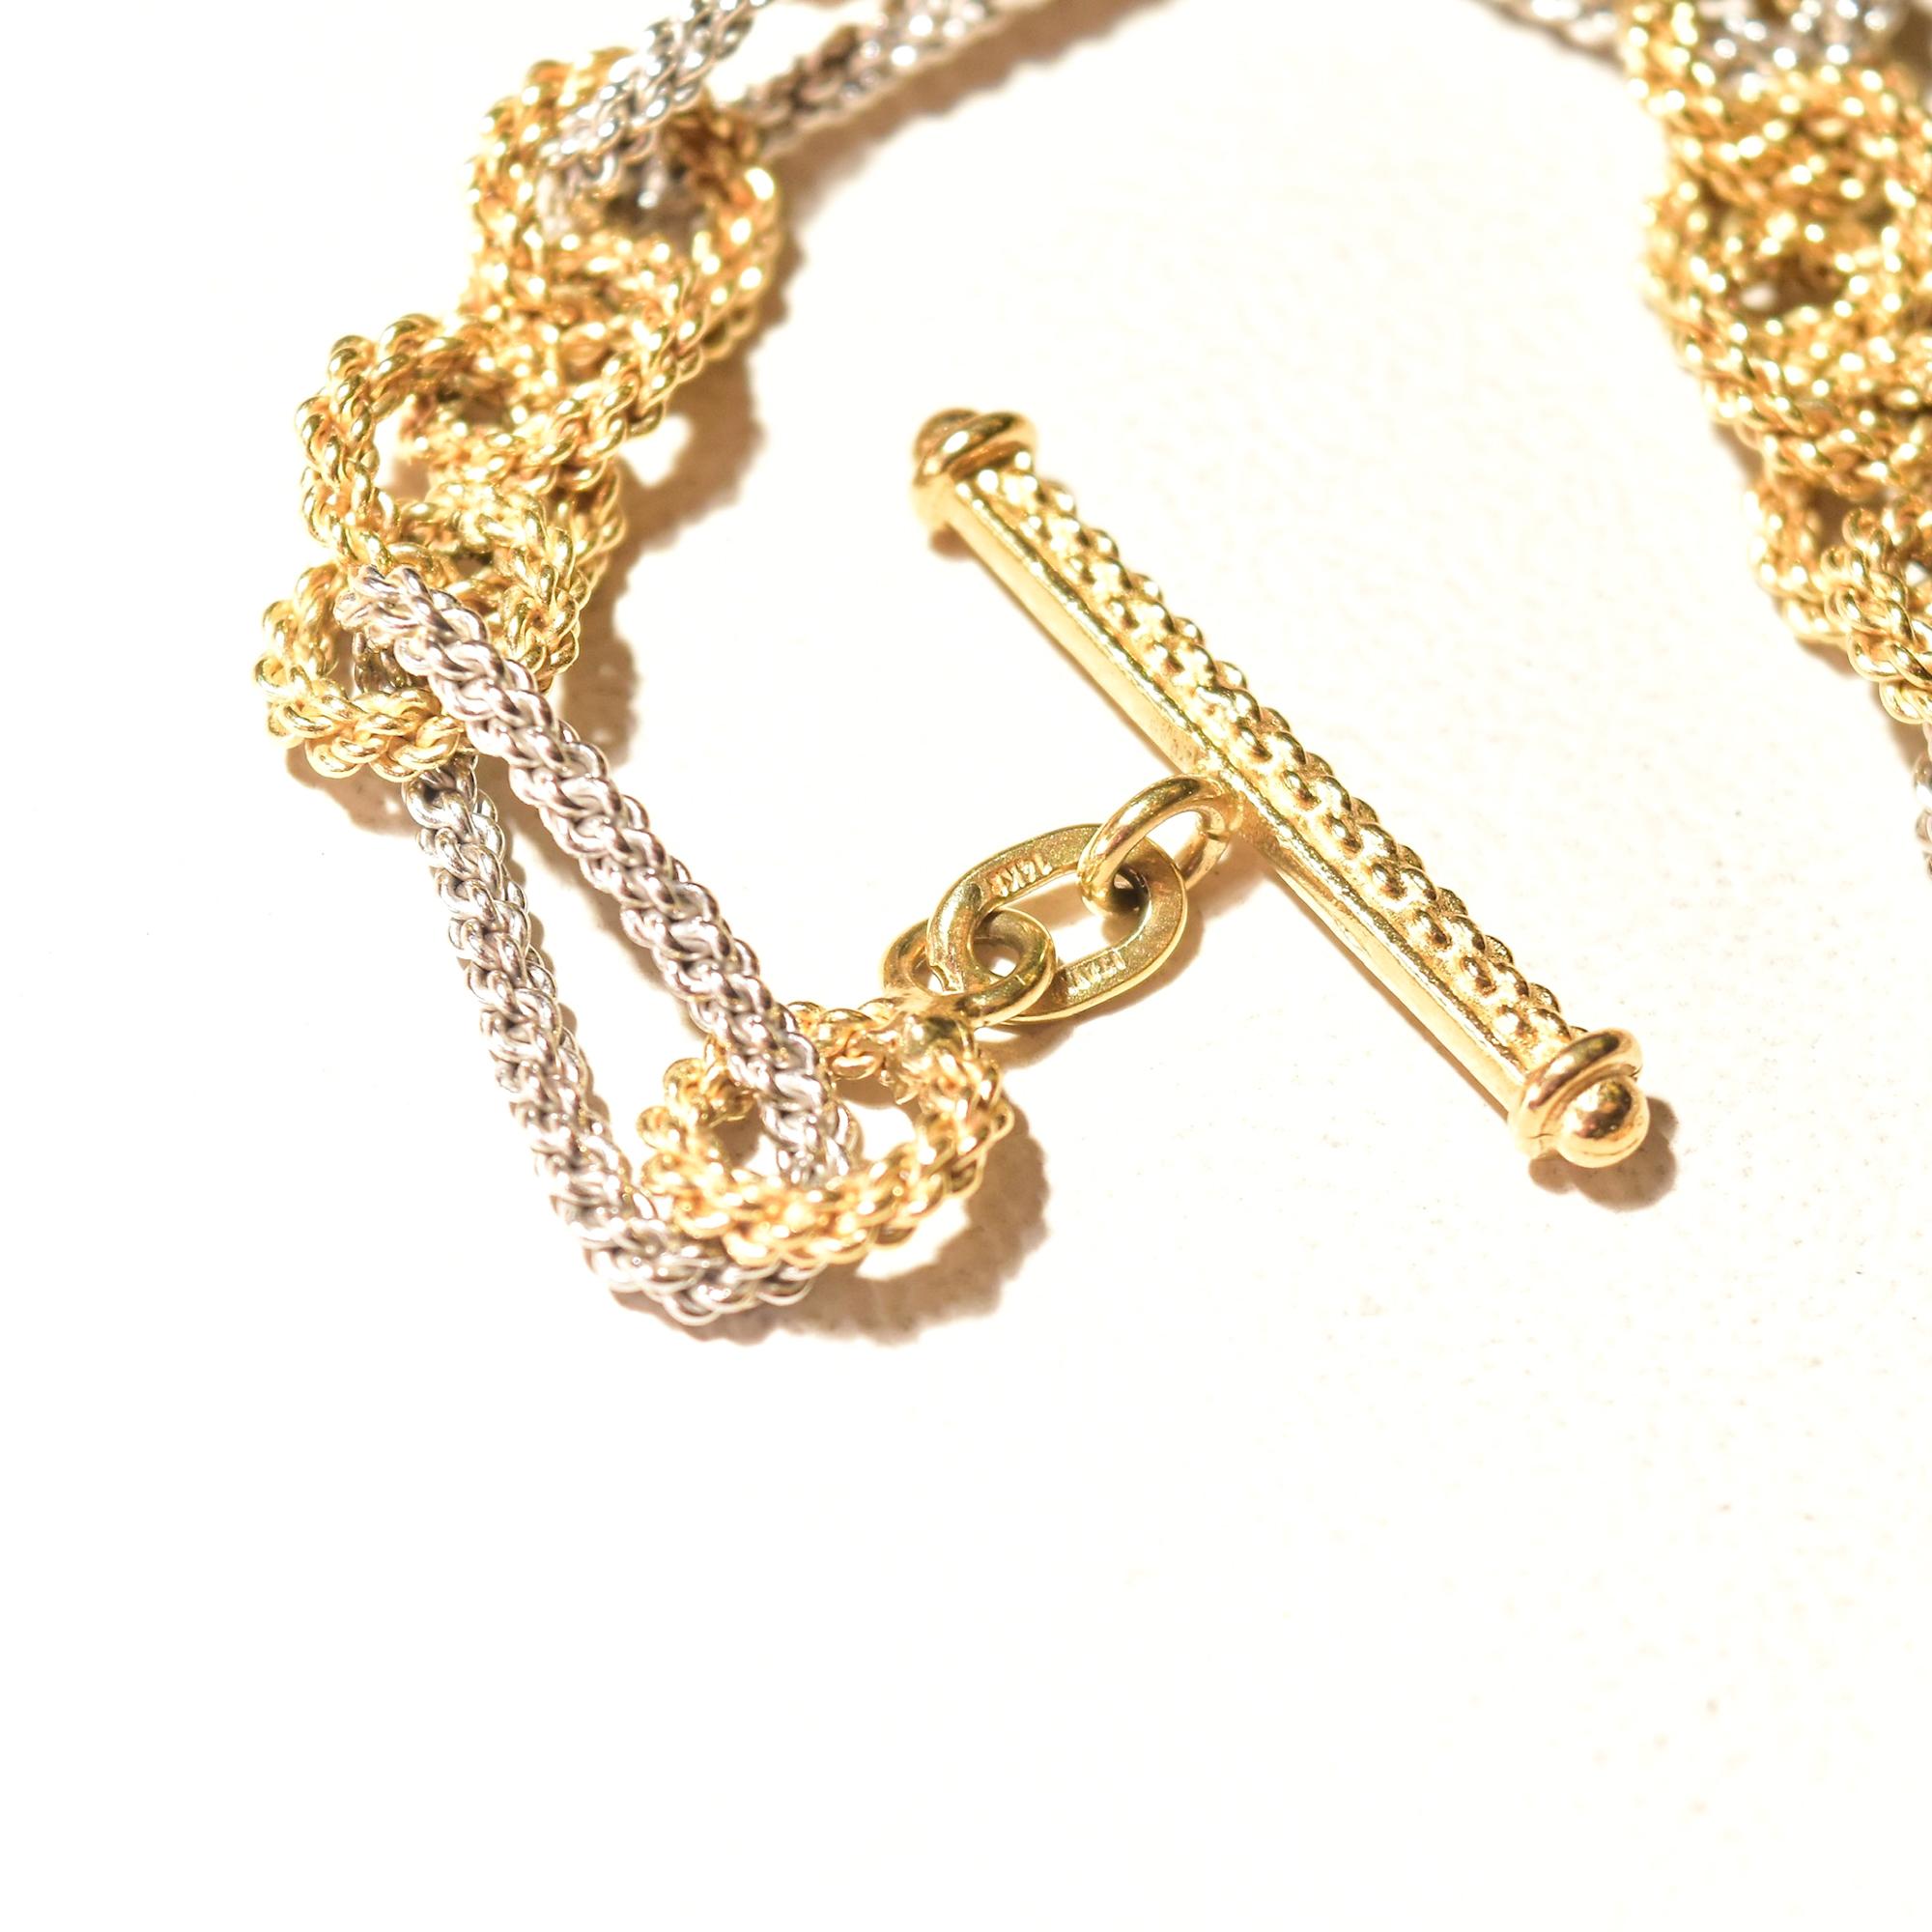 An extravagant two-tone 14k gold textured link bracelet for an Italian modernist jewelry collection. Features a figaro style link pattern with round yellow gold links in sets of 4 alternating with long twisted white gold links. The solid gold links